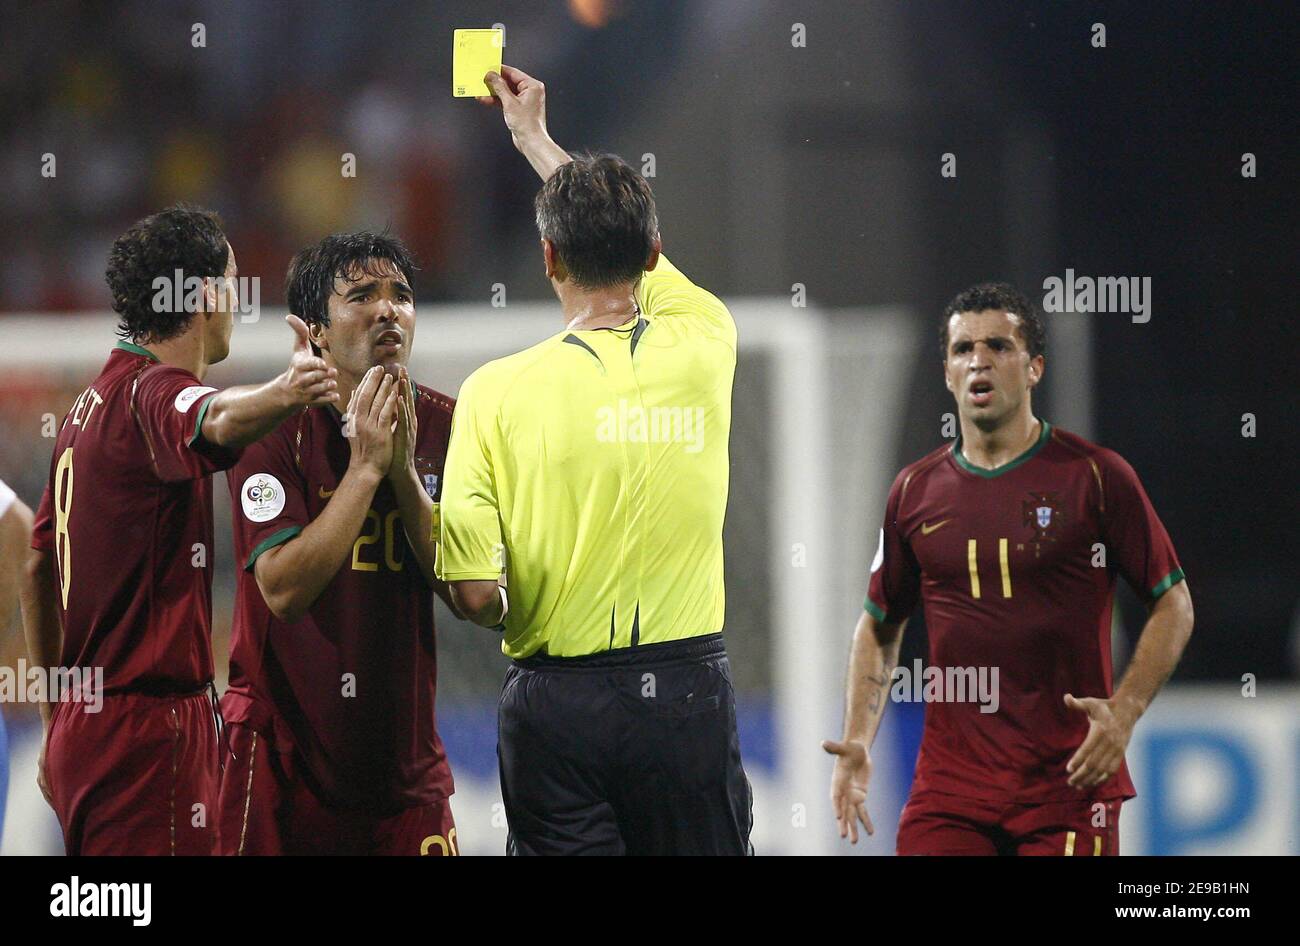 Portugal's Deco receives a yellow card during the World Cup 2006, second round, Portugal vs Hollande, at the Easy-Credit-Stadion, in Nuremberg, Germany, on June 25, 2006. Portugal won 1-0. Photo by Christian Liewig/ABACAPRESS.COM Stock Photo